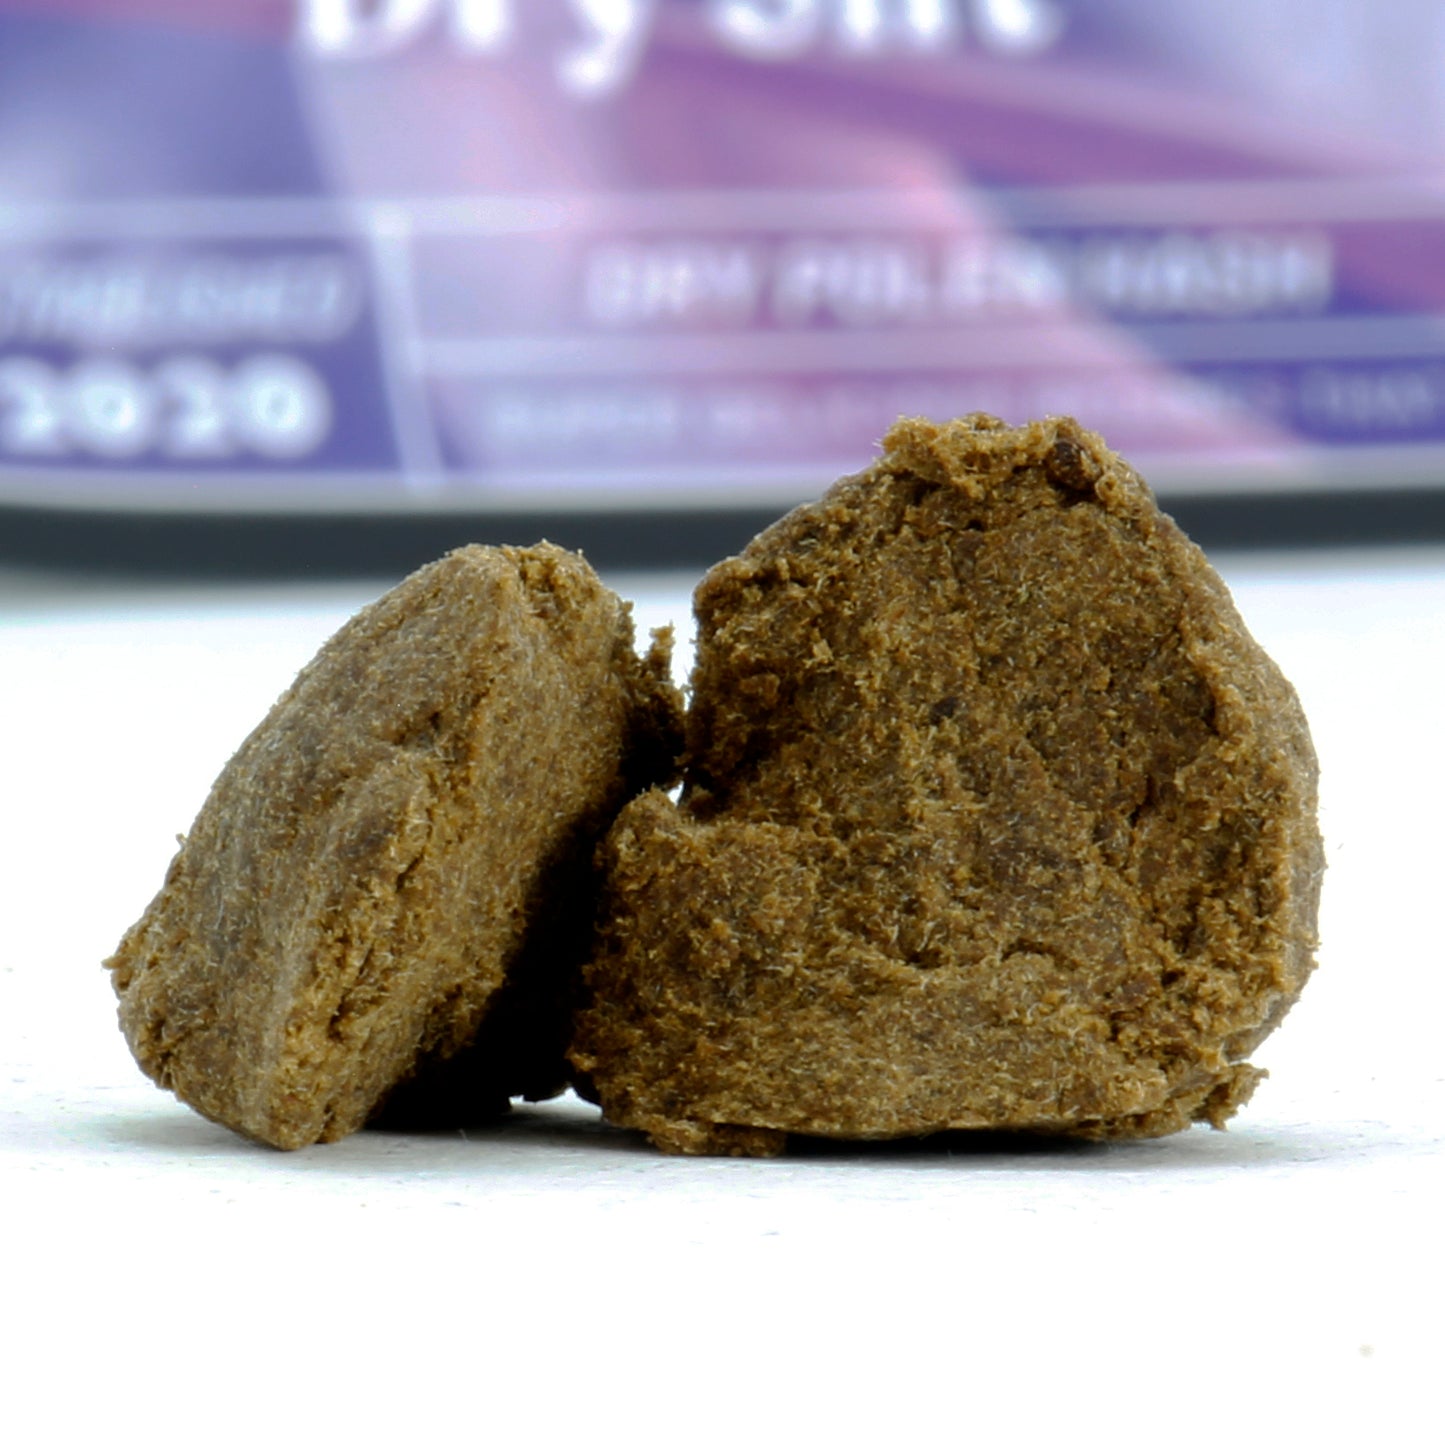 Dry Sift